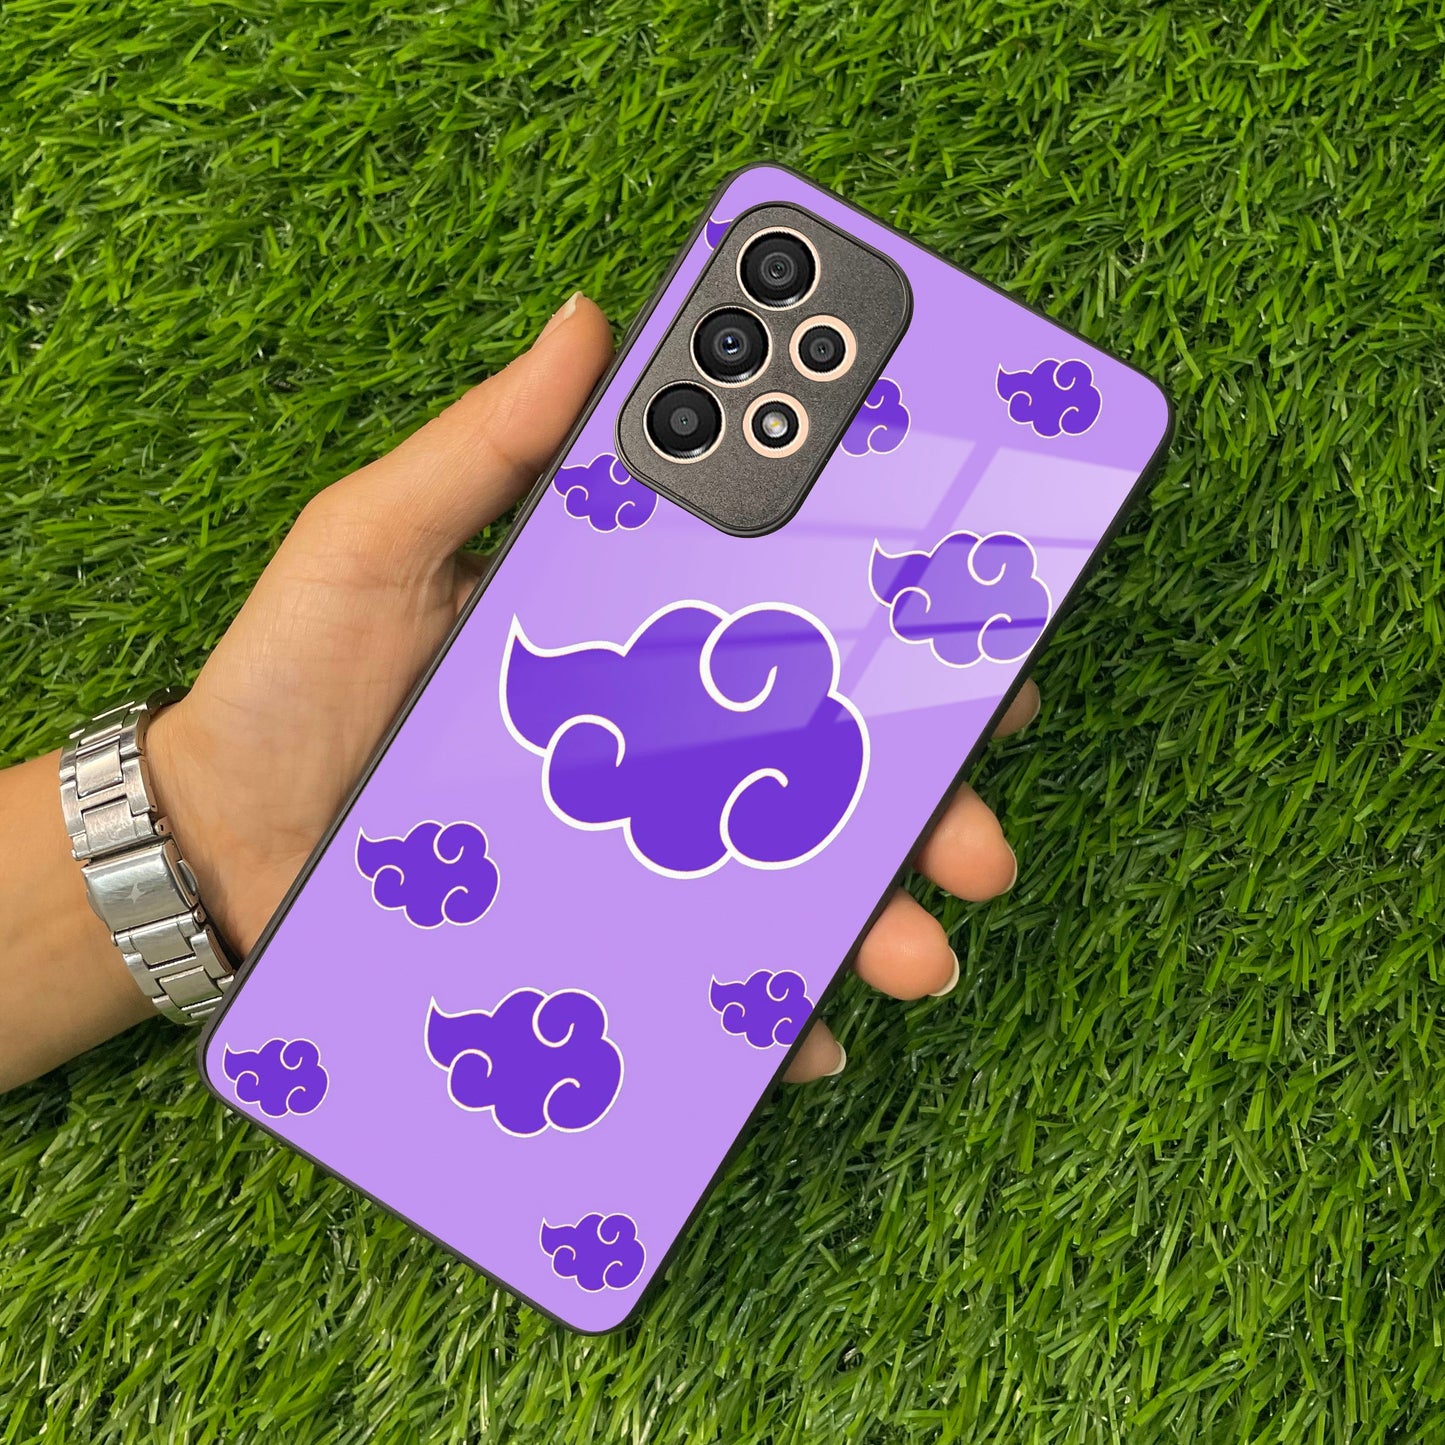 Purple Cloud Mobile Glass Phone Case Cover For Samsung